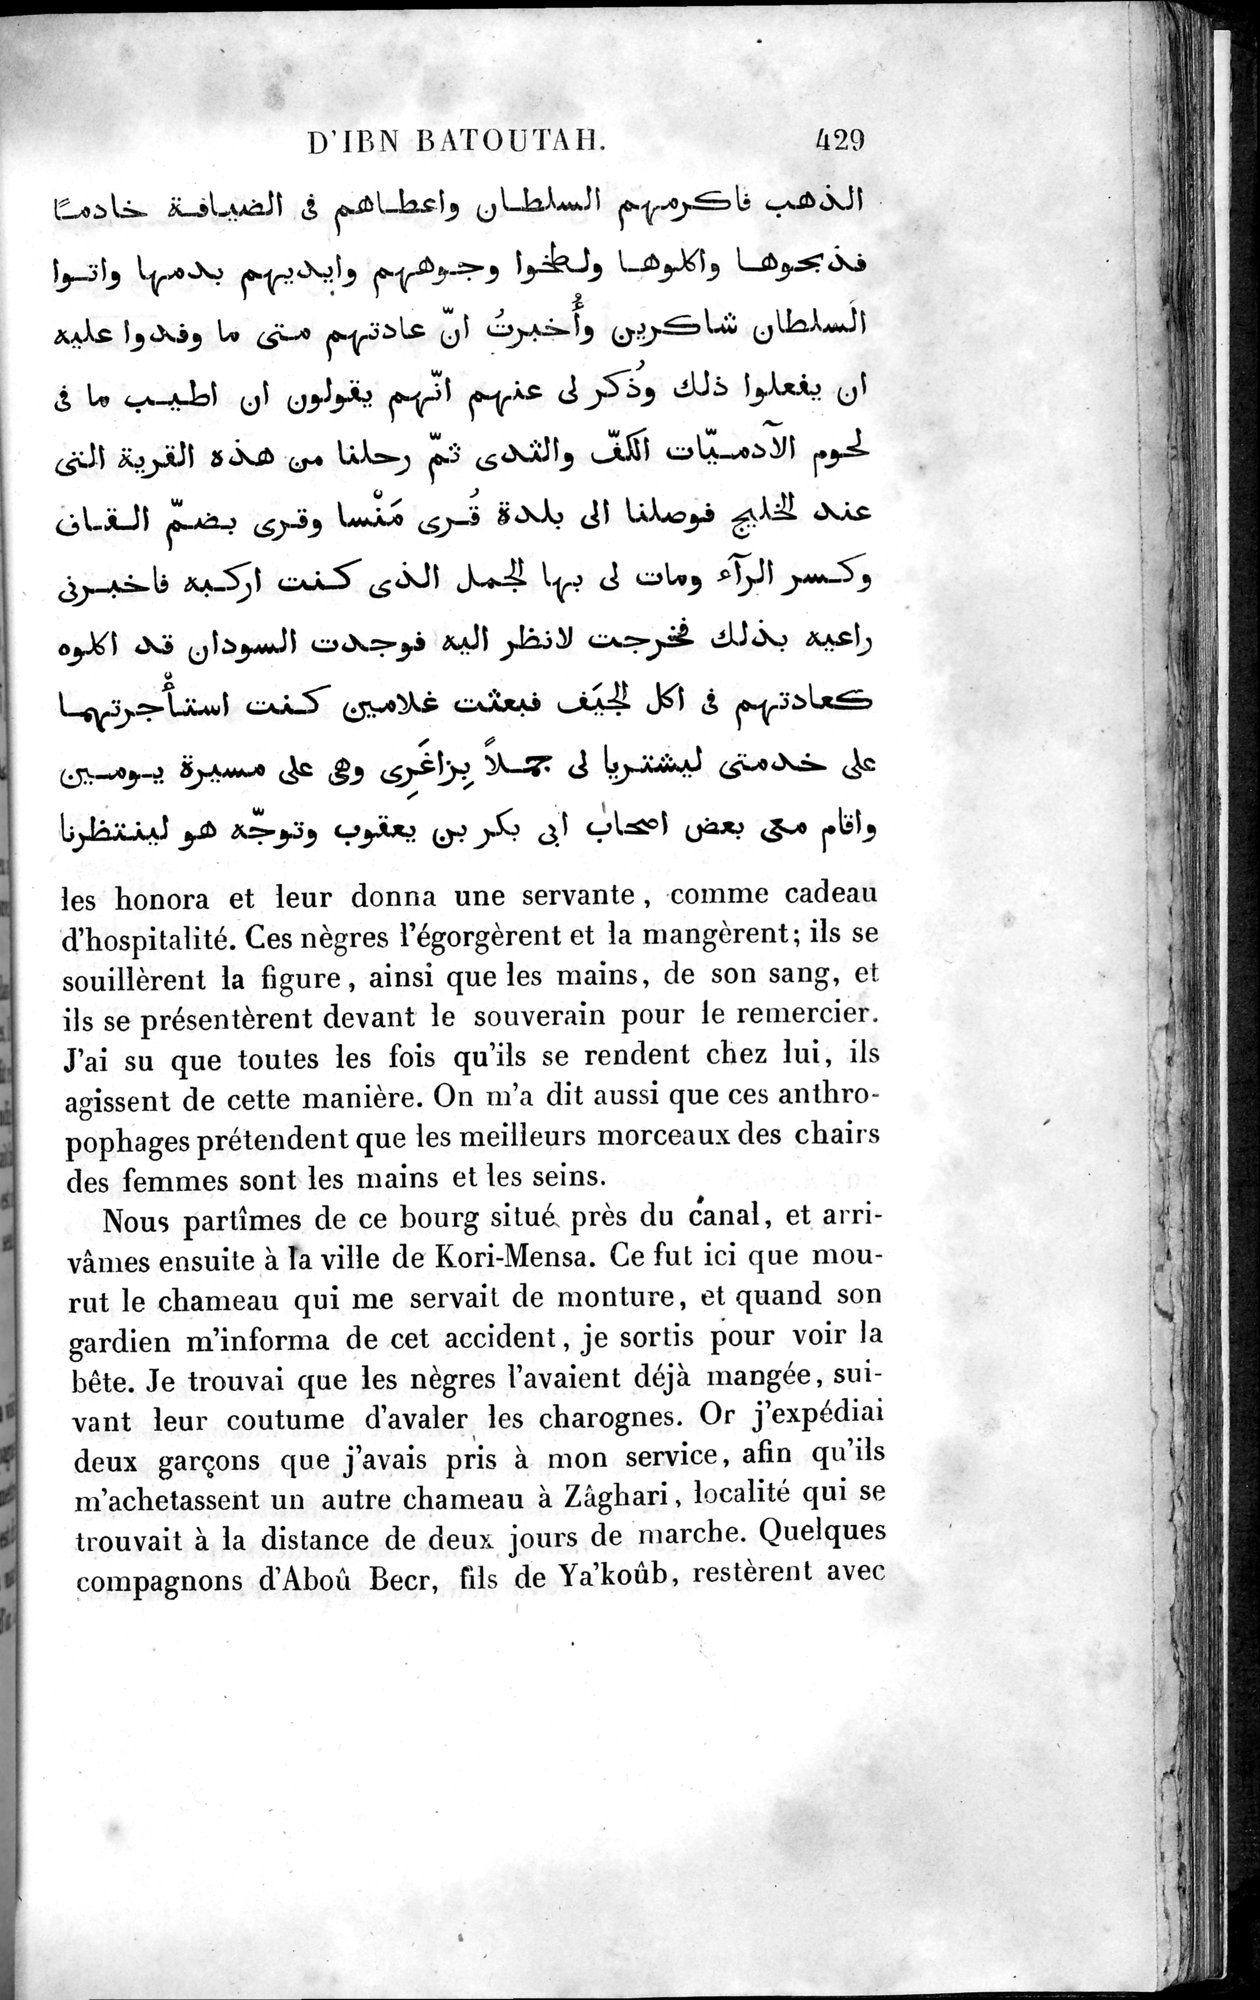 Voyages d'Ibn Batoutah : vol.4 / Page 441 (Grayscale High Resolution Image)